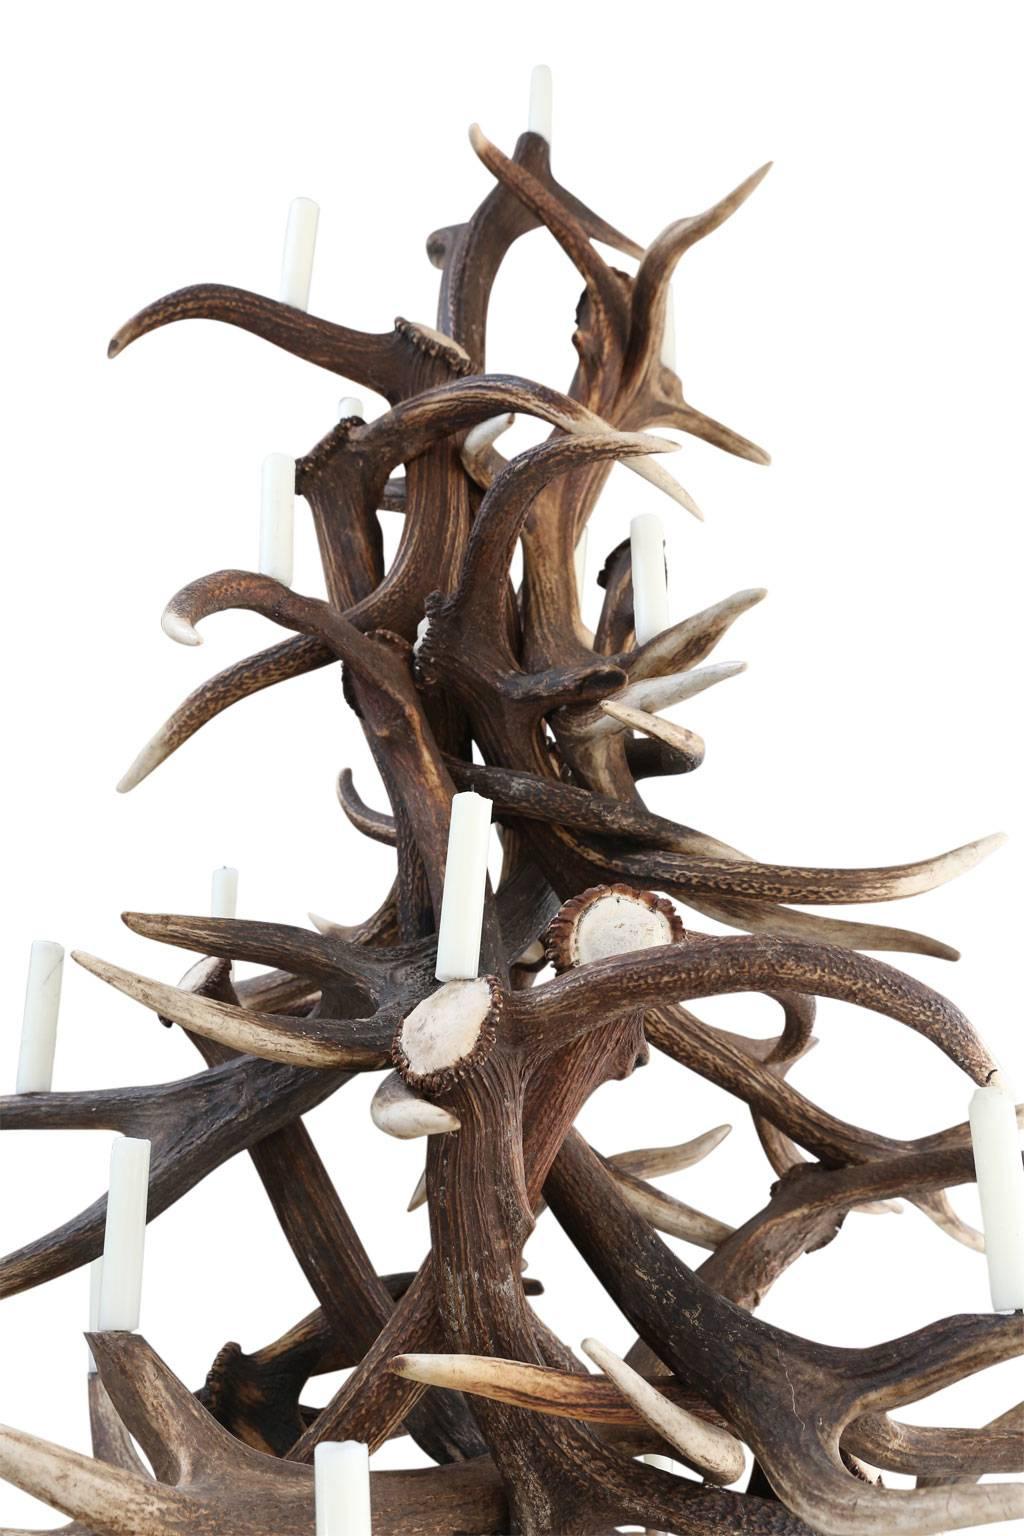 Large tree from naturally shed stag antlers. Tree has metal prickets for candles (can be electrified).